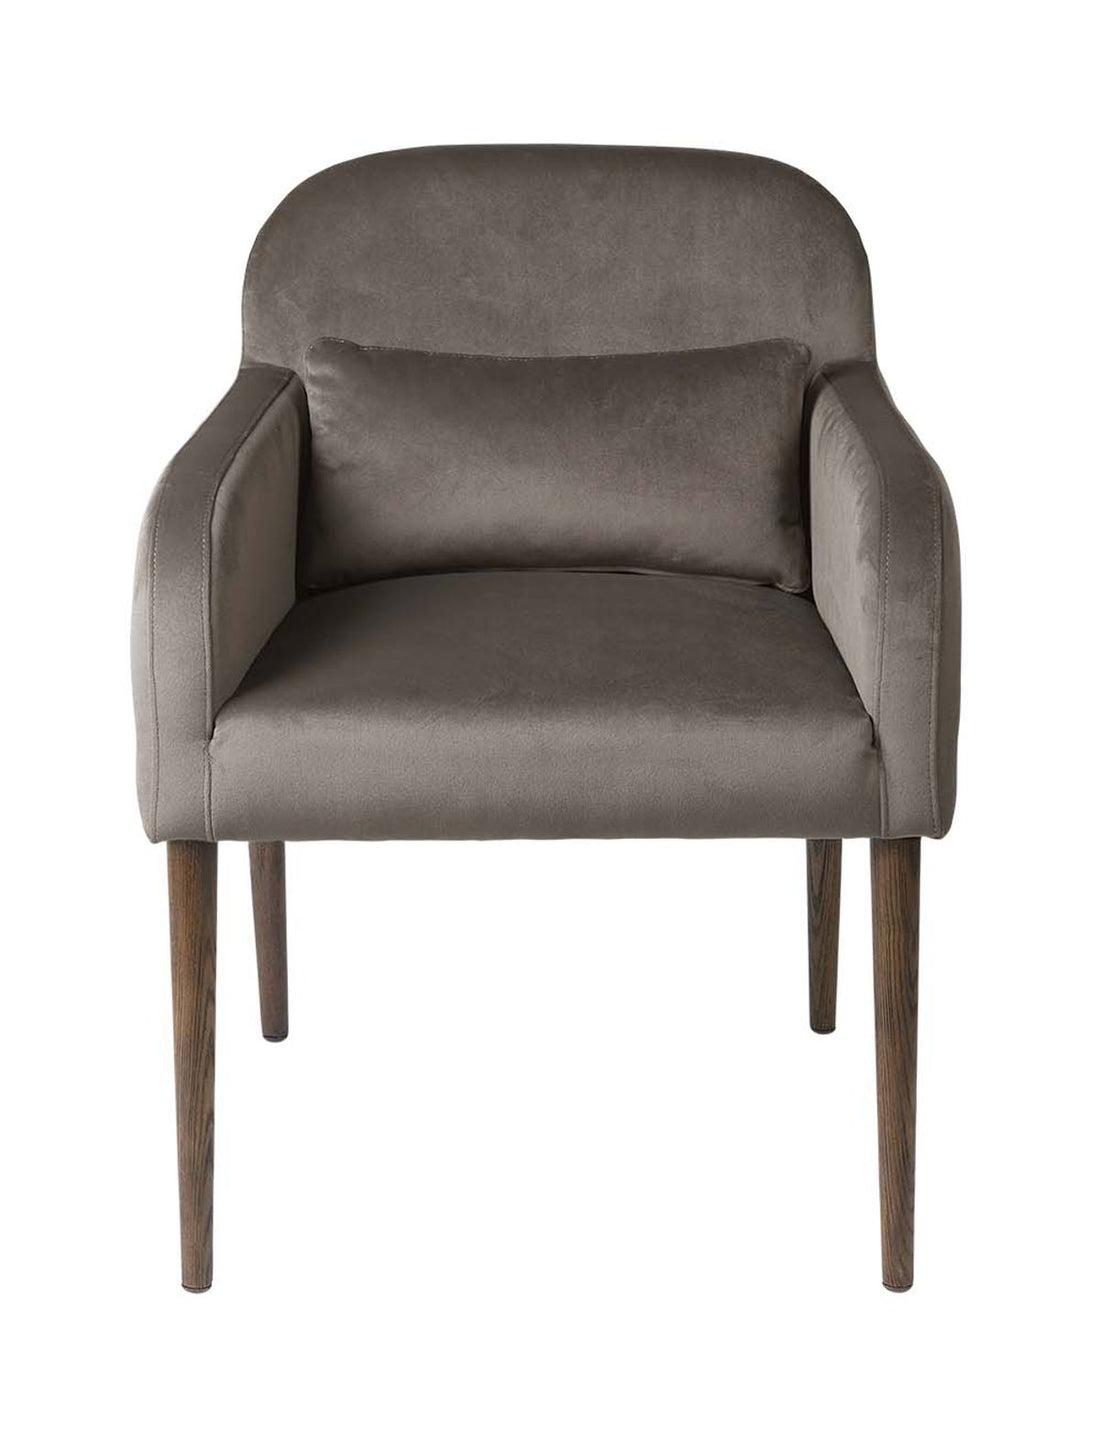 Cosy Living Gotland Dining Chair - Taupe